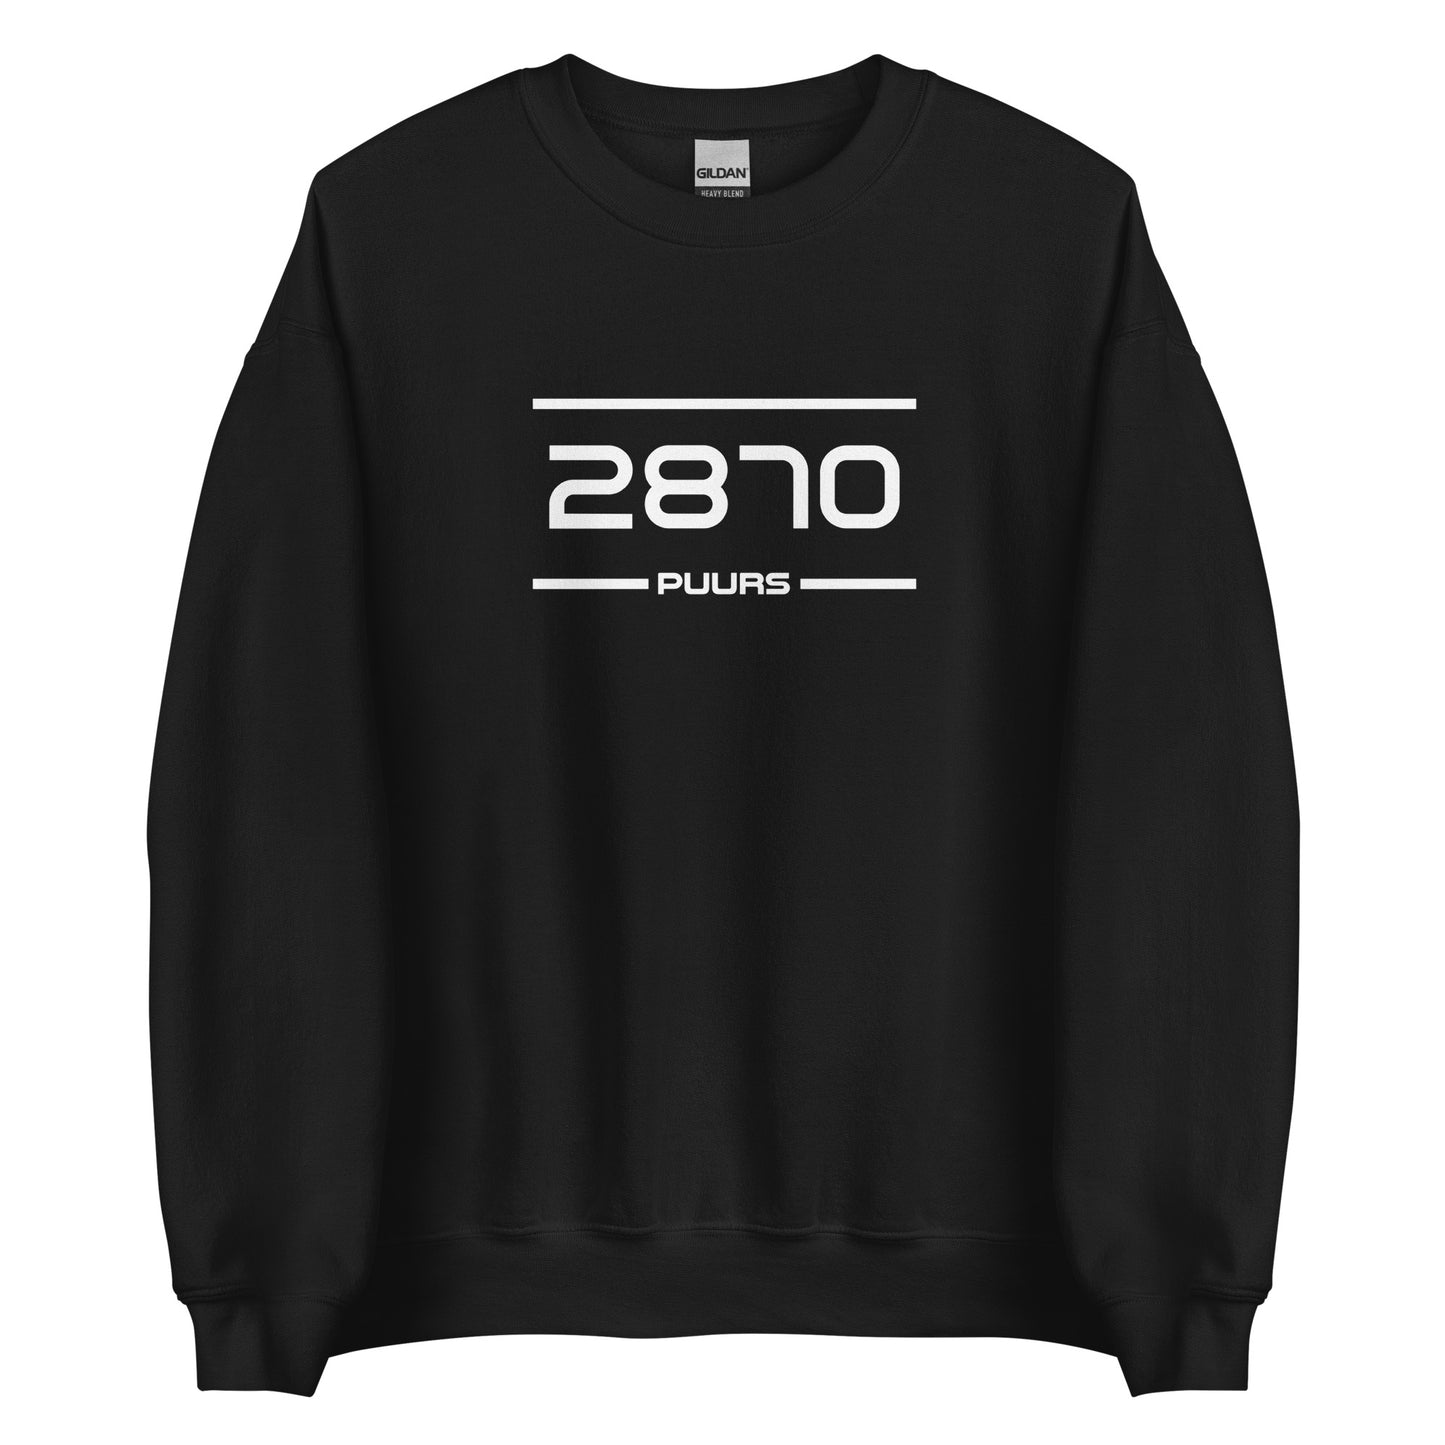 Sweater - 2870 - Puurs (M/V)